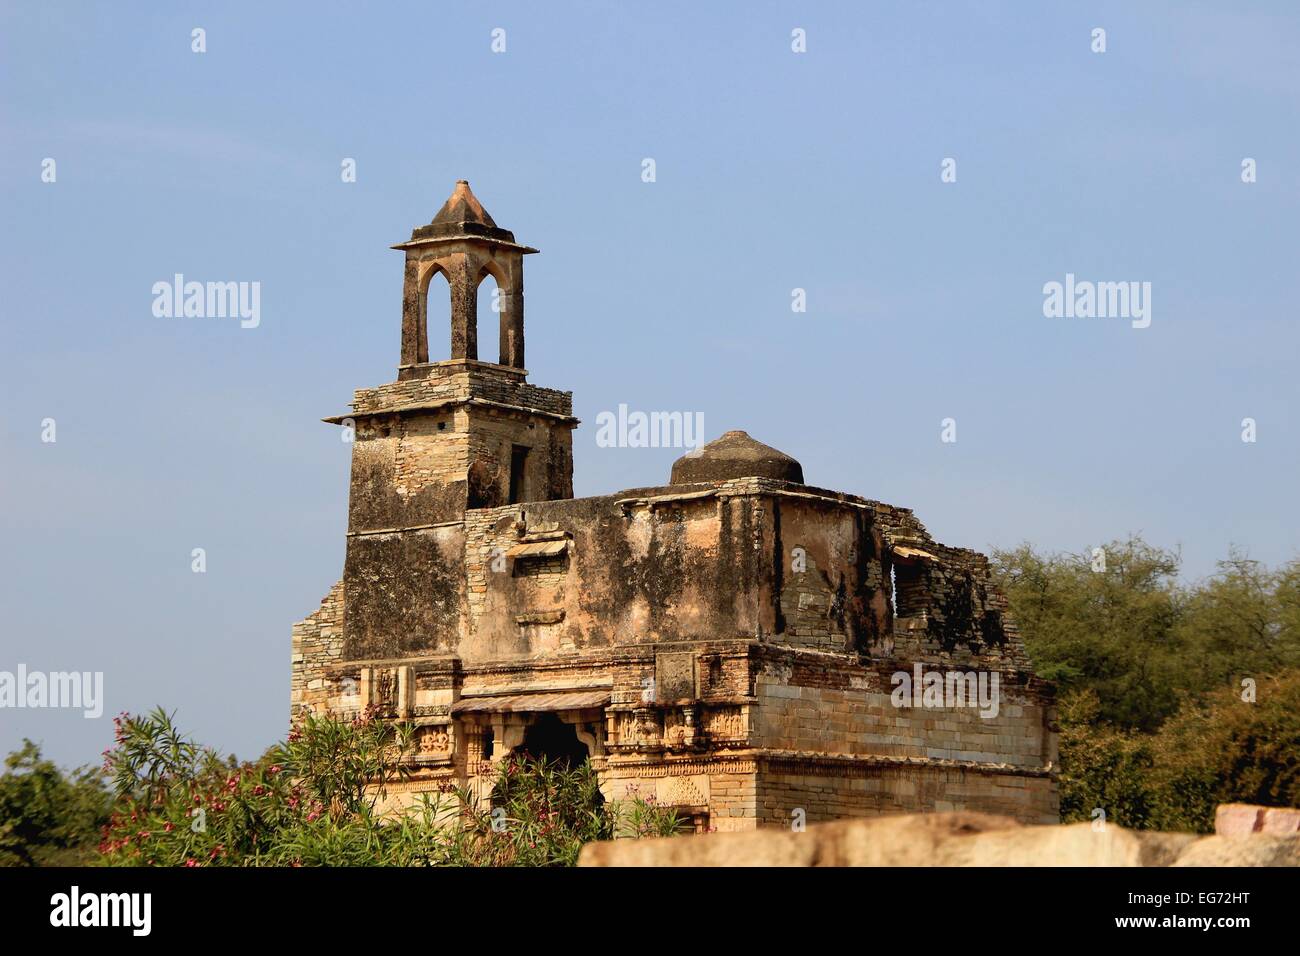 Top portion of palace having watch tower at Chittorgarh Fort, Rajasthan, India, Asia Stock Photo